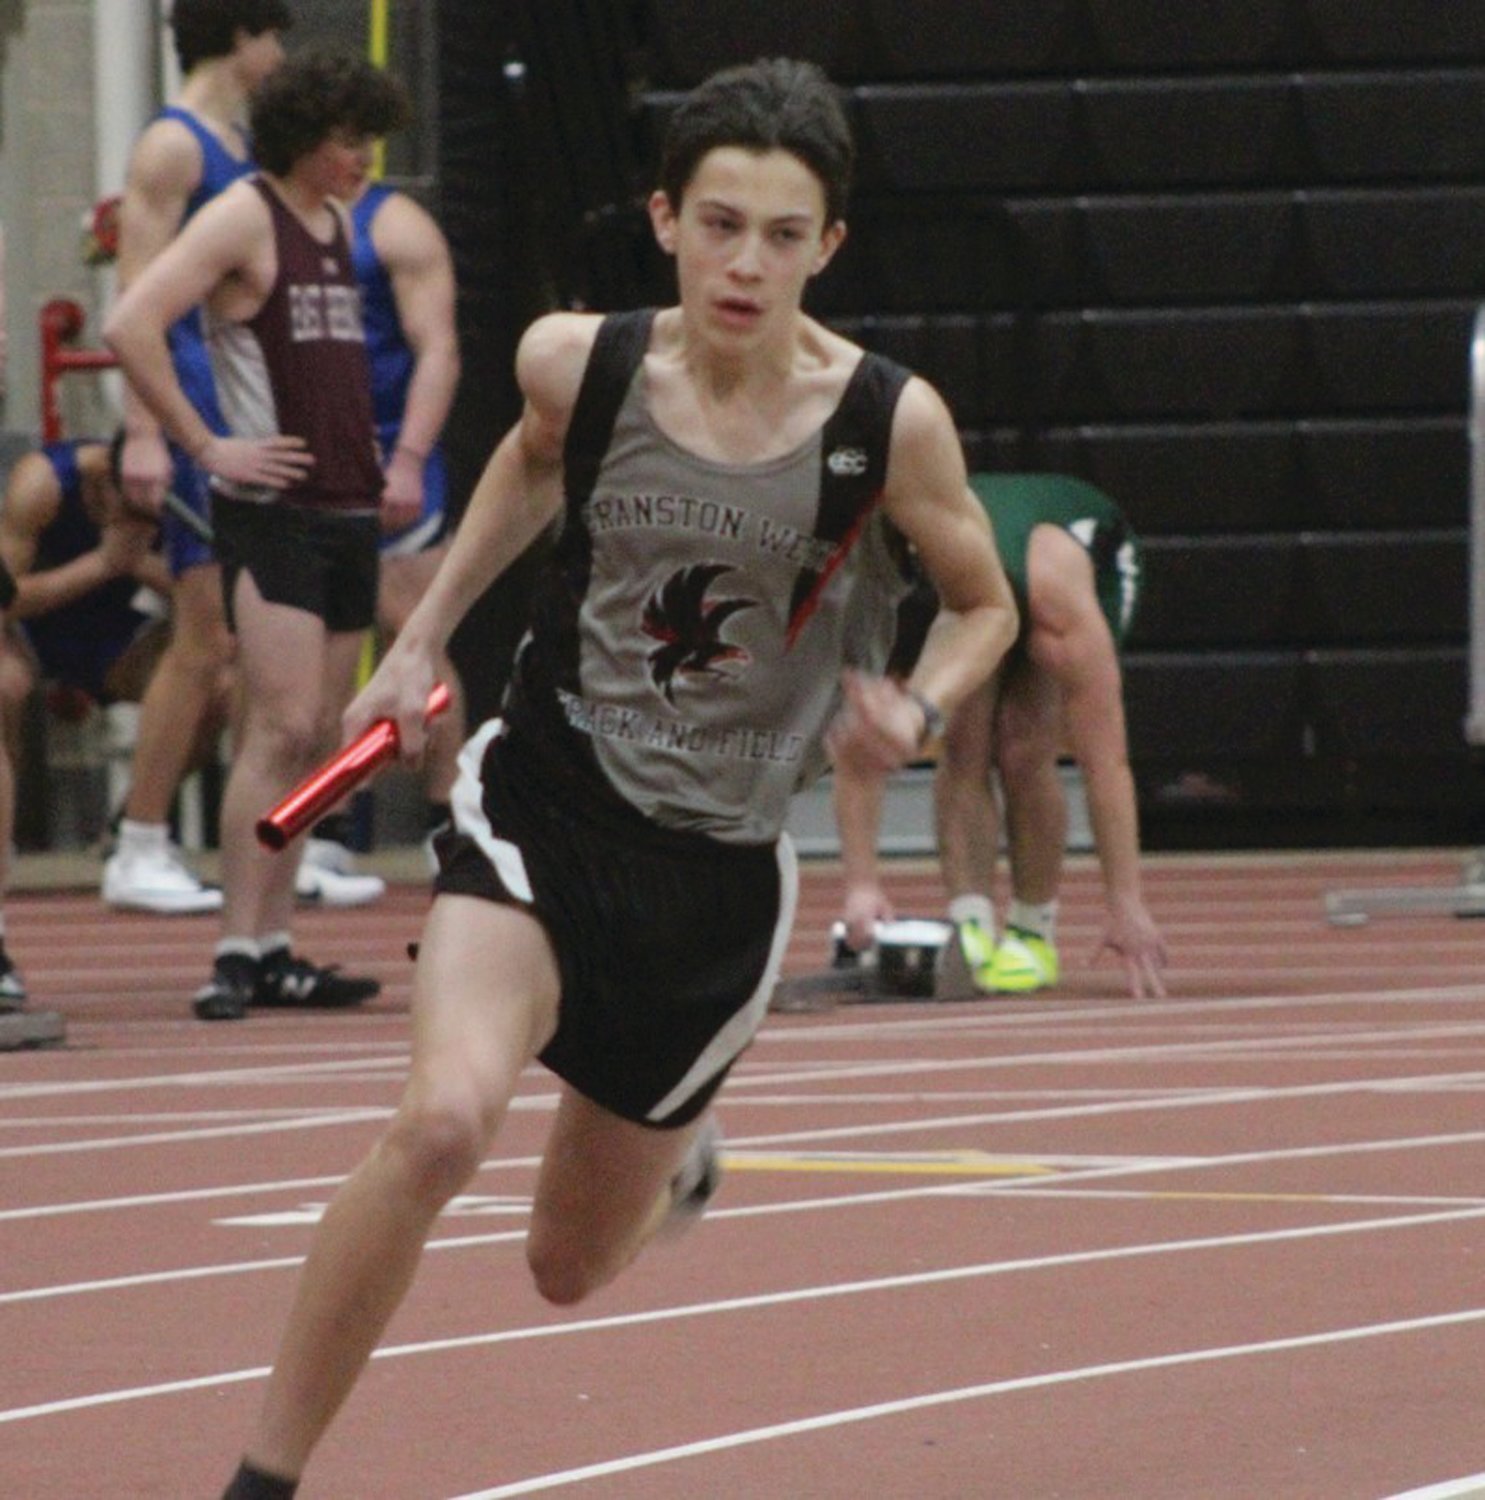 RELAY RACE: West’s Ryan Stoloff carries the baton in a relay.